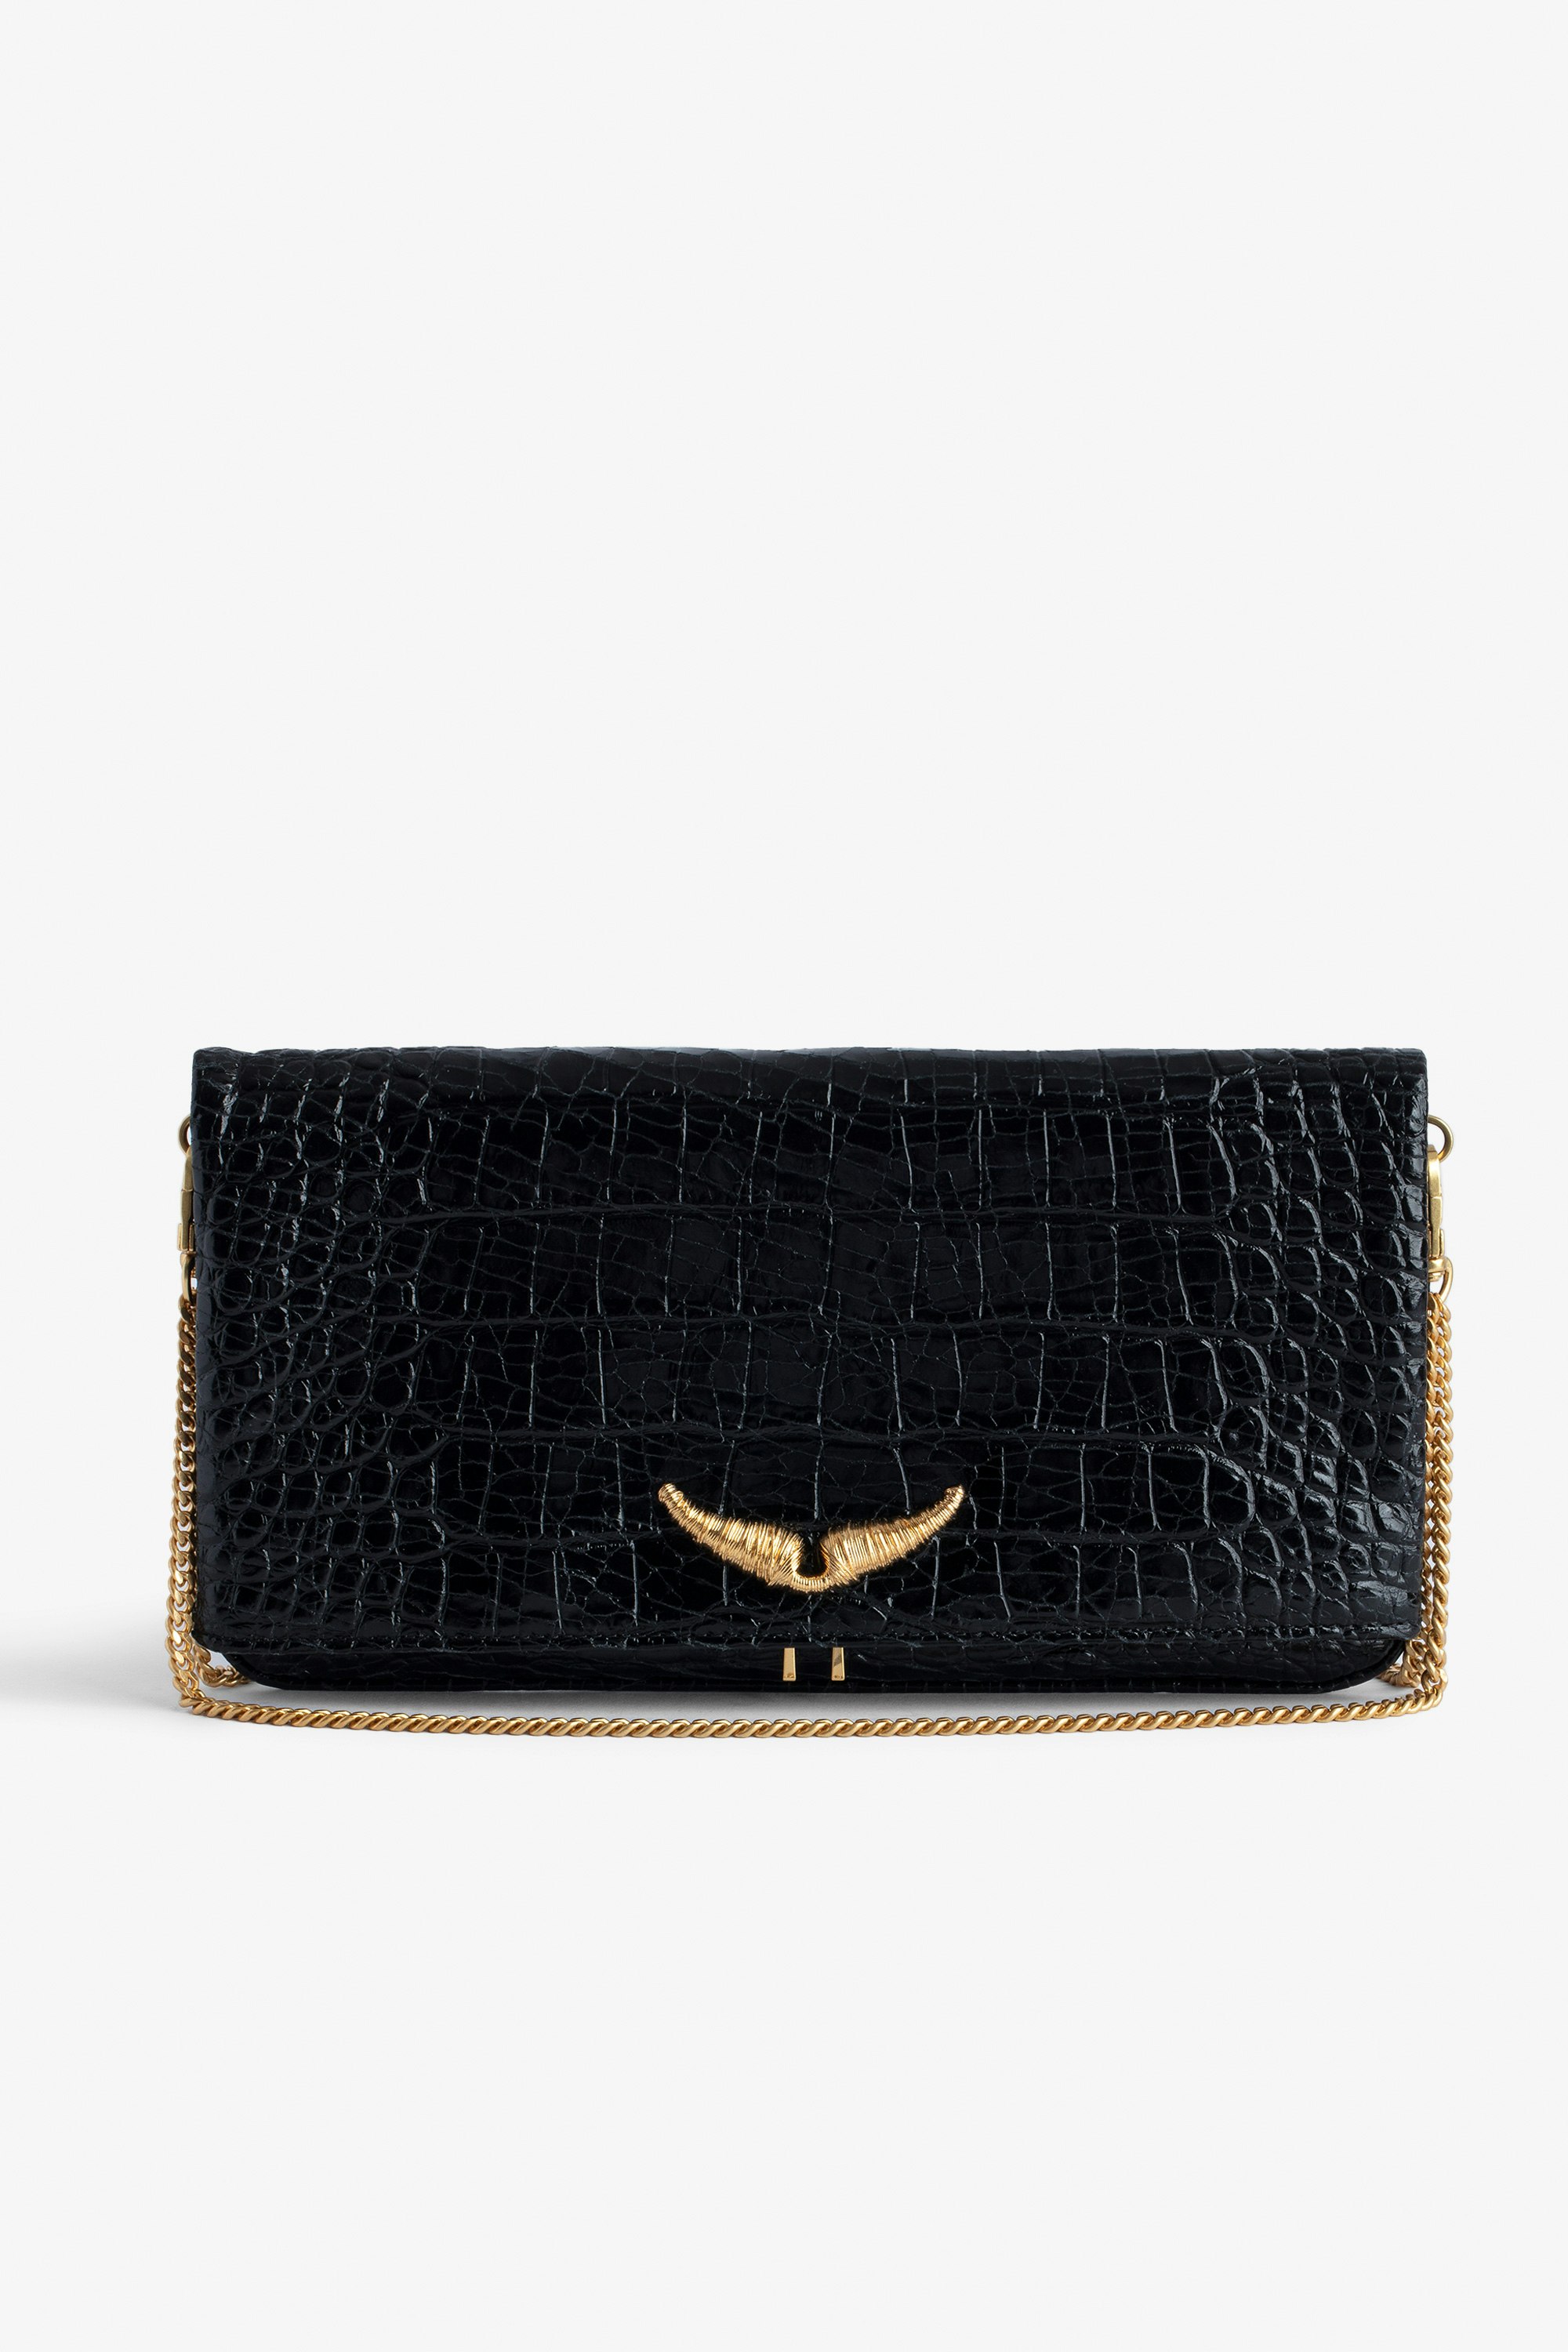 Rock Embossed Clutch - Rock black croc-embossed leather clutch with gold-tone metal chain.